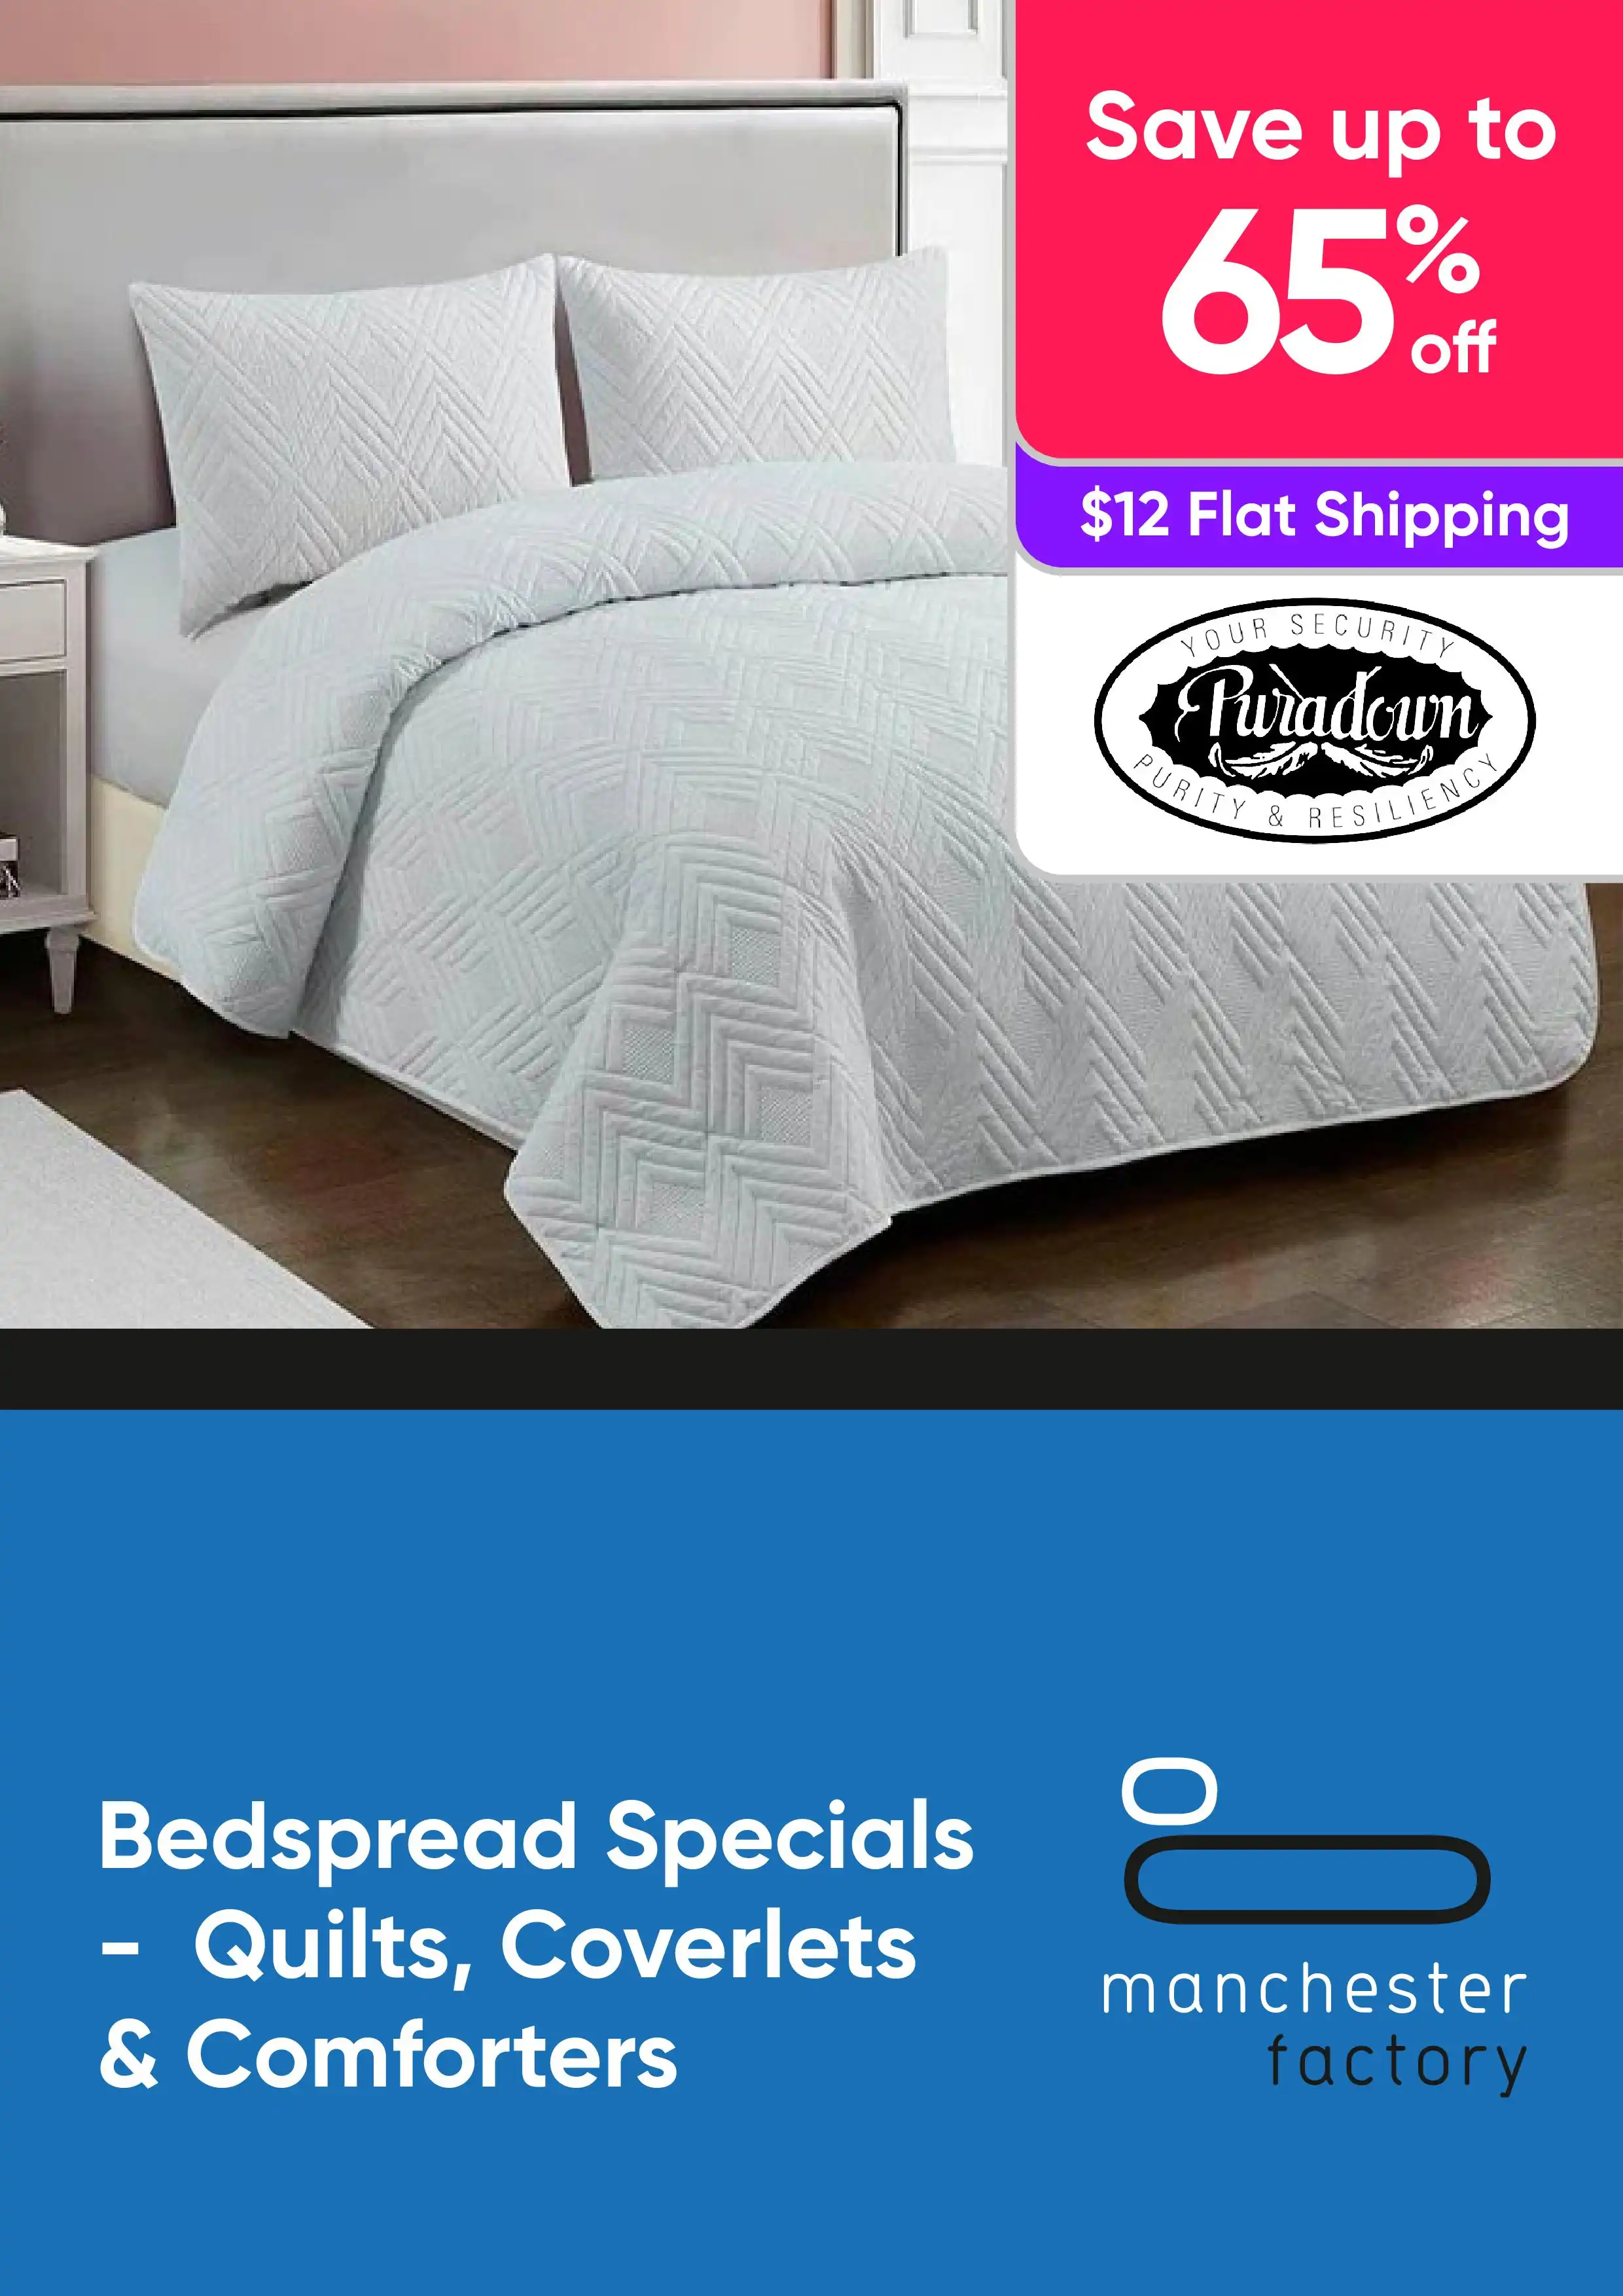 Bedspread Specials - Save up to 65% On Quilts, Coverlets and Comforters